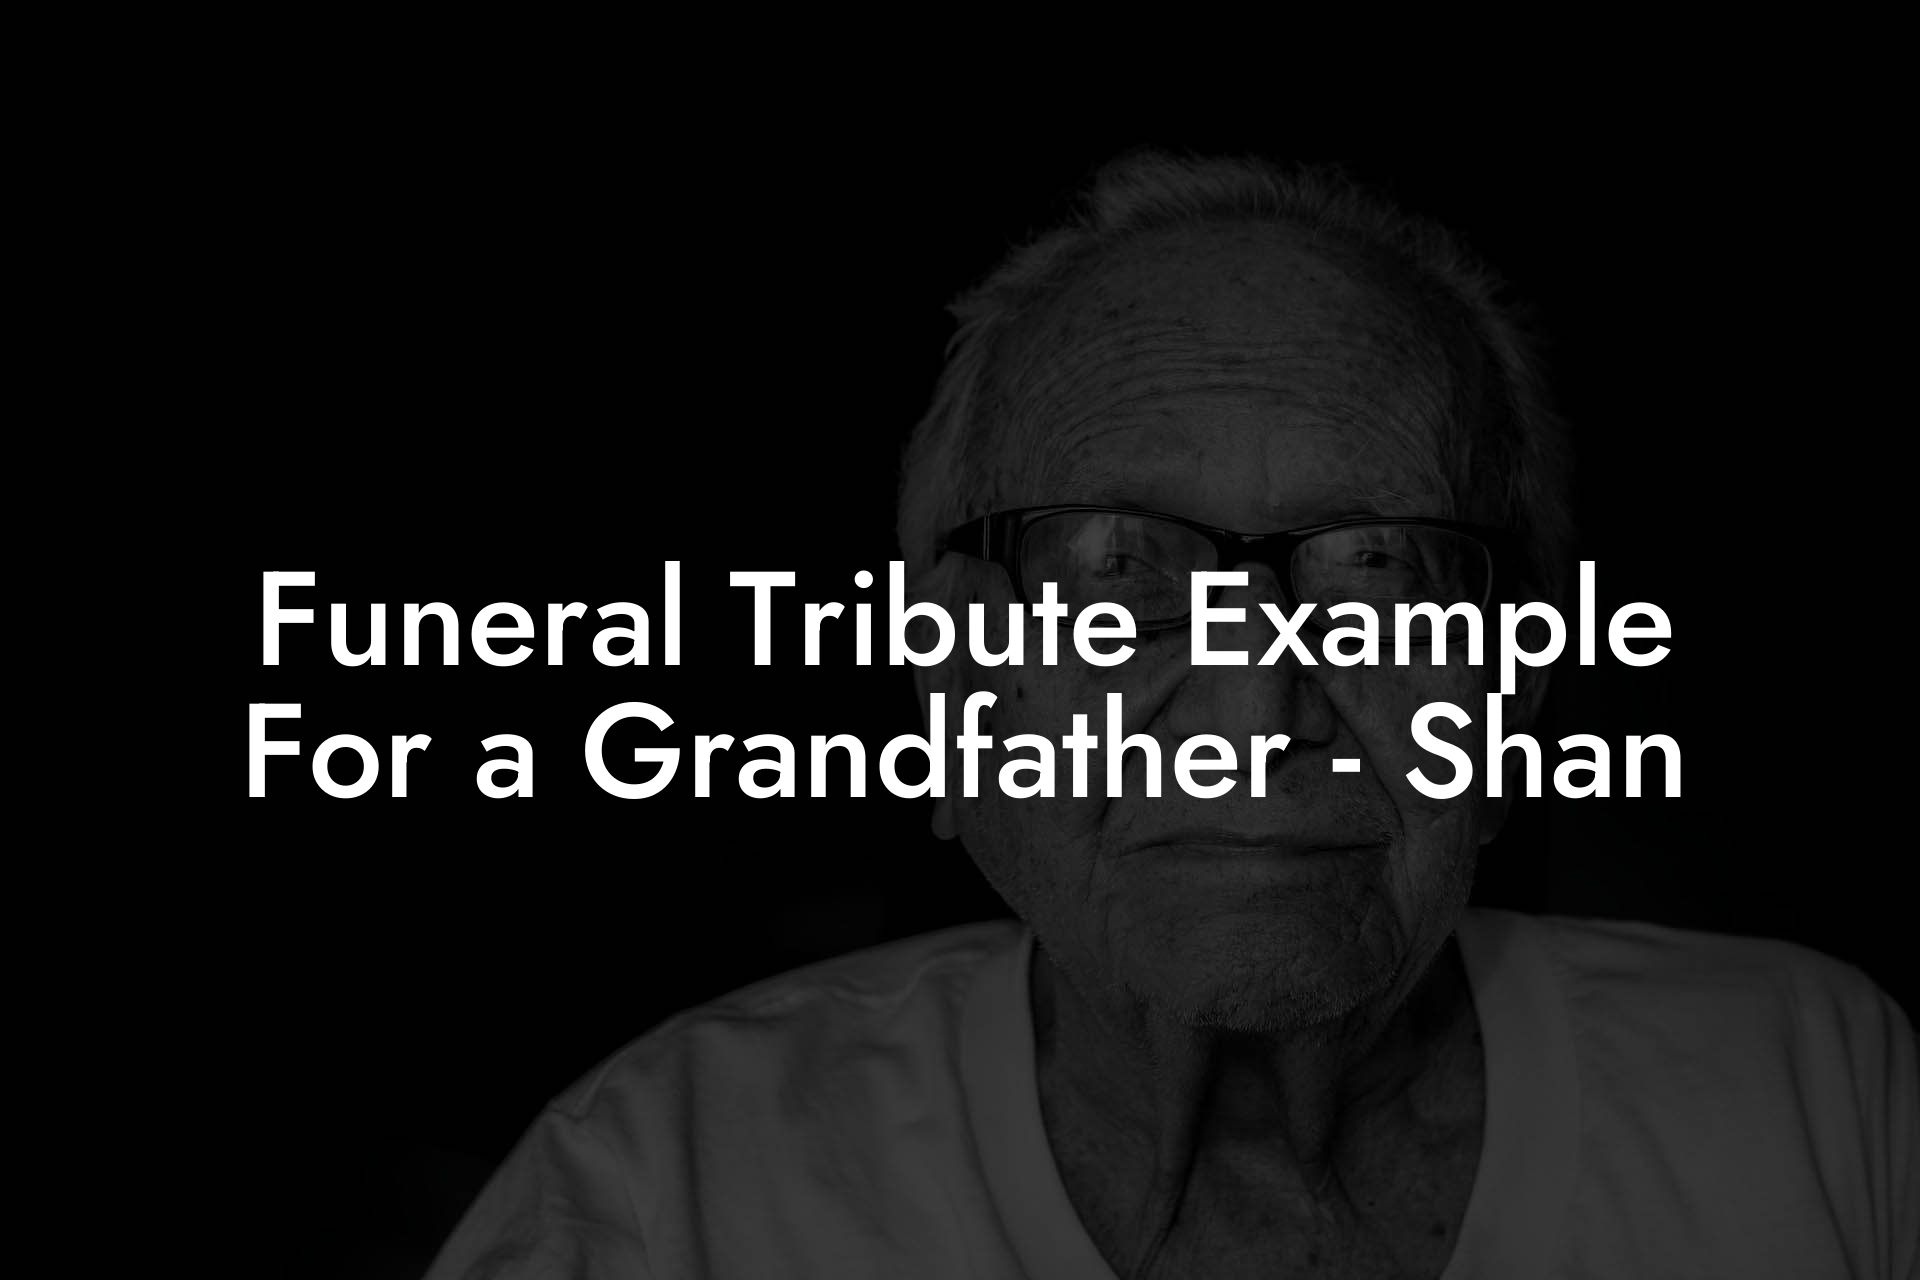 Funeral Tribute Example For a Grandfather - Shan